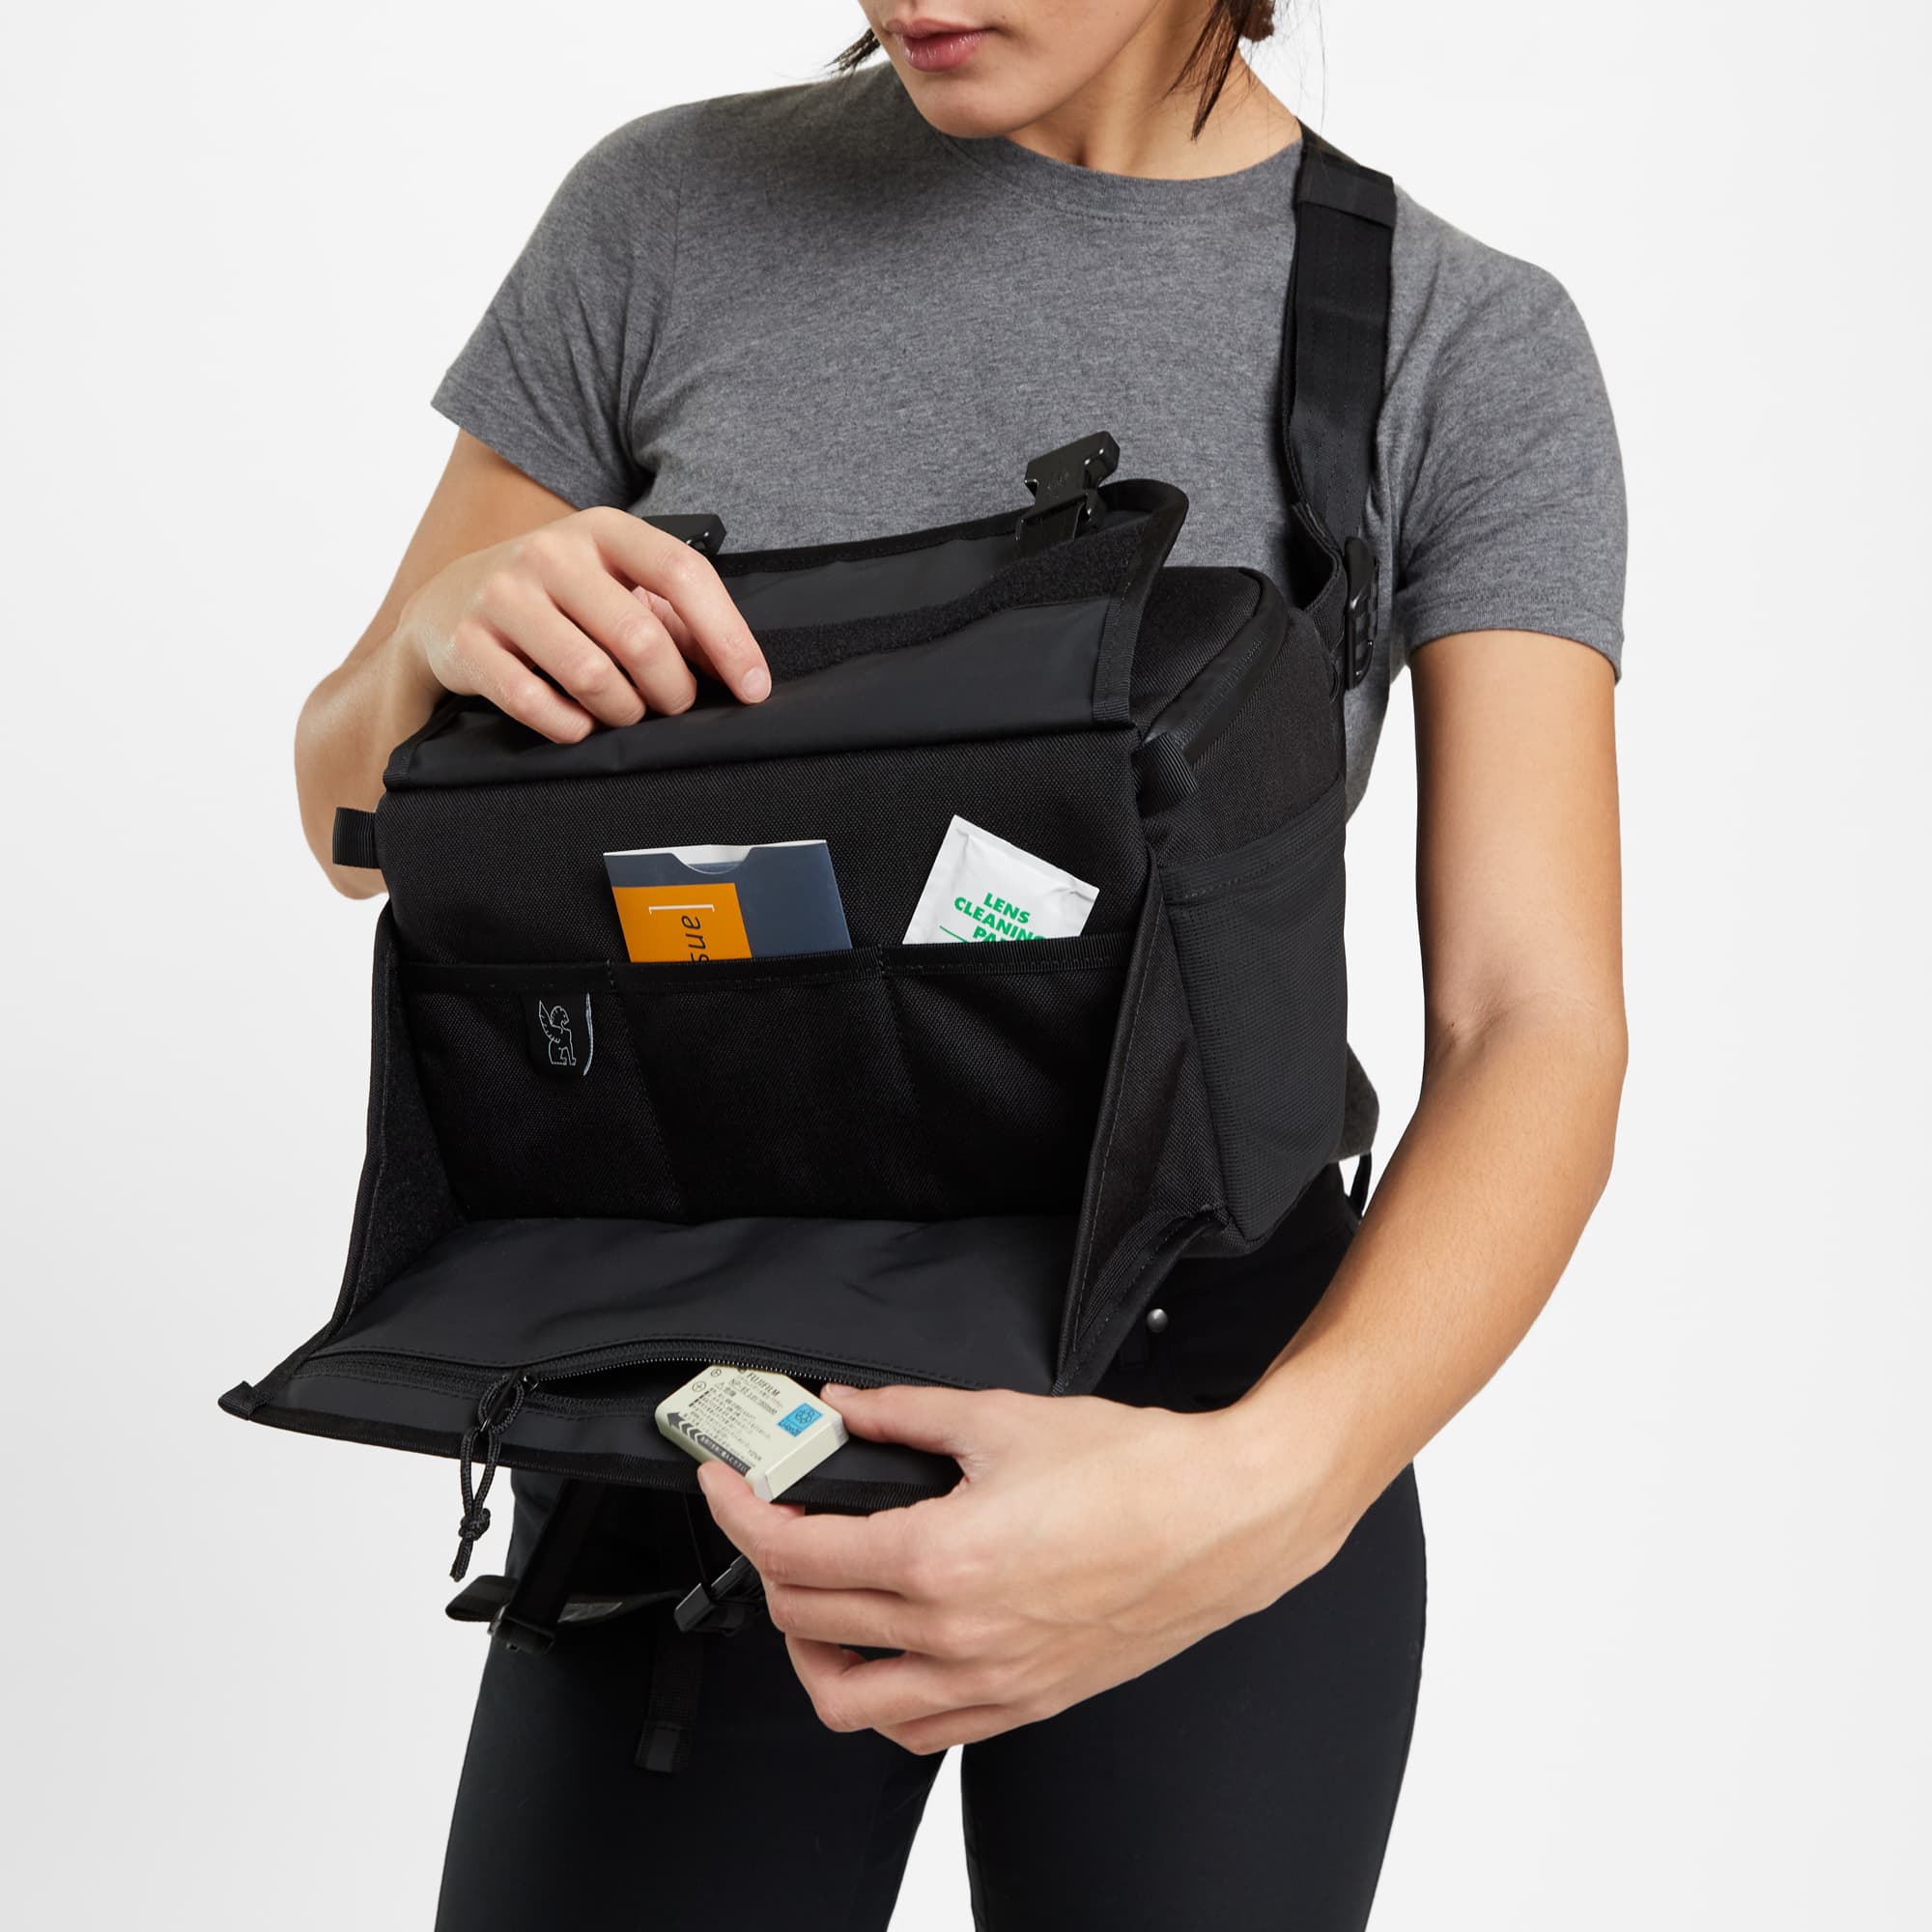 Niko tech camera sling in black a woman is utilizing the bag